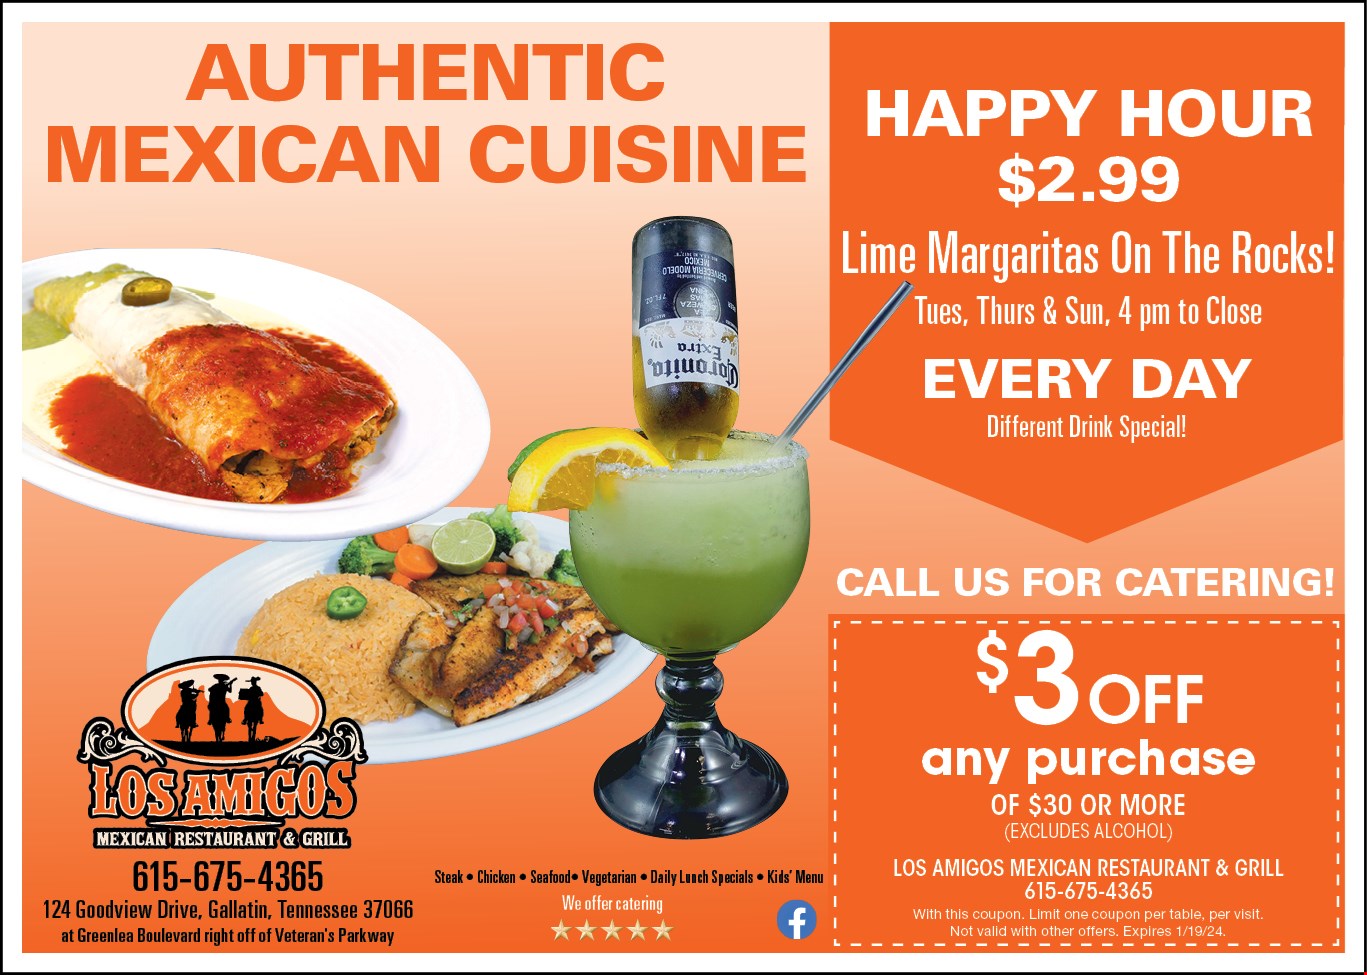 Los Amigos Independence - Reviews and Deals at